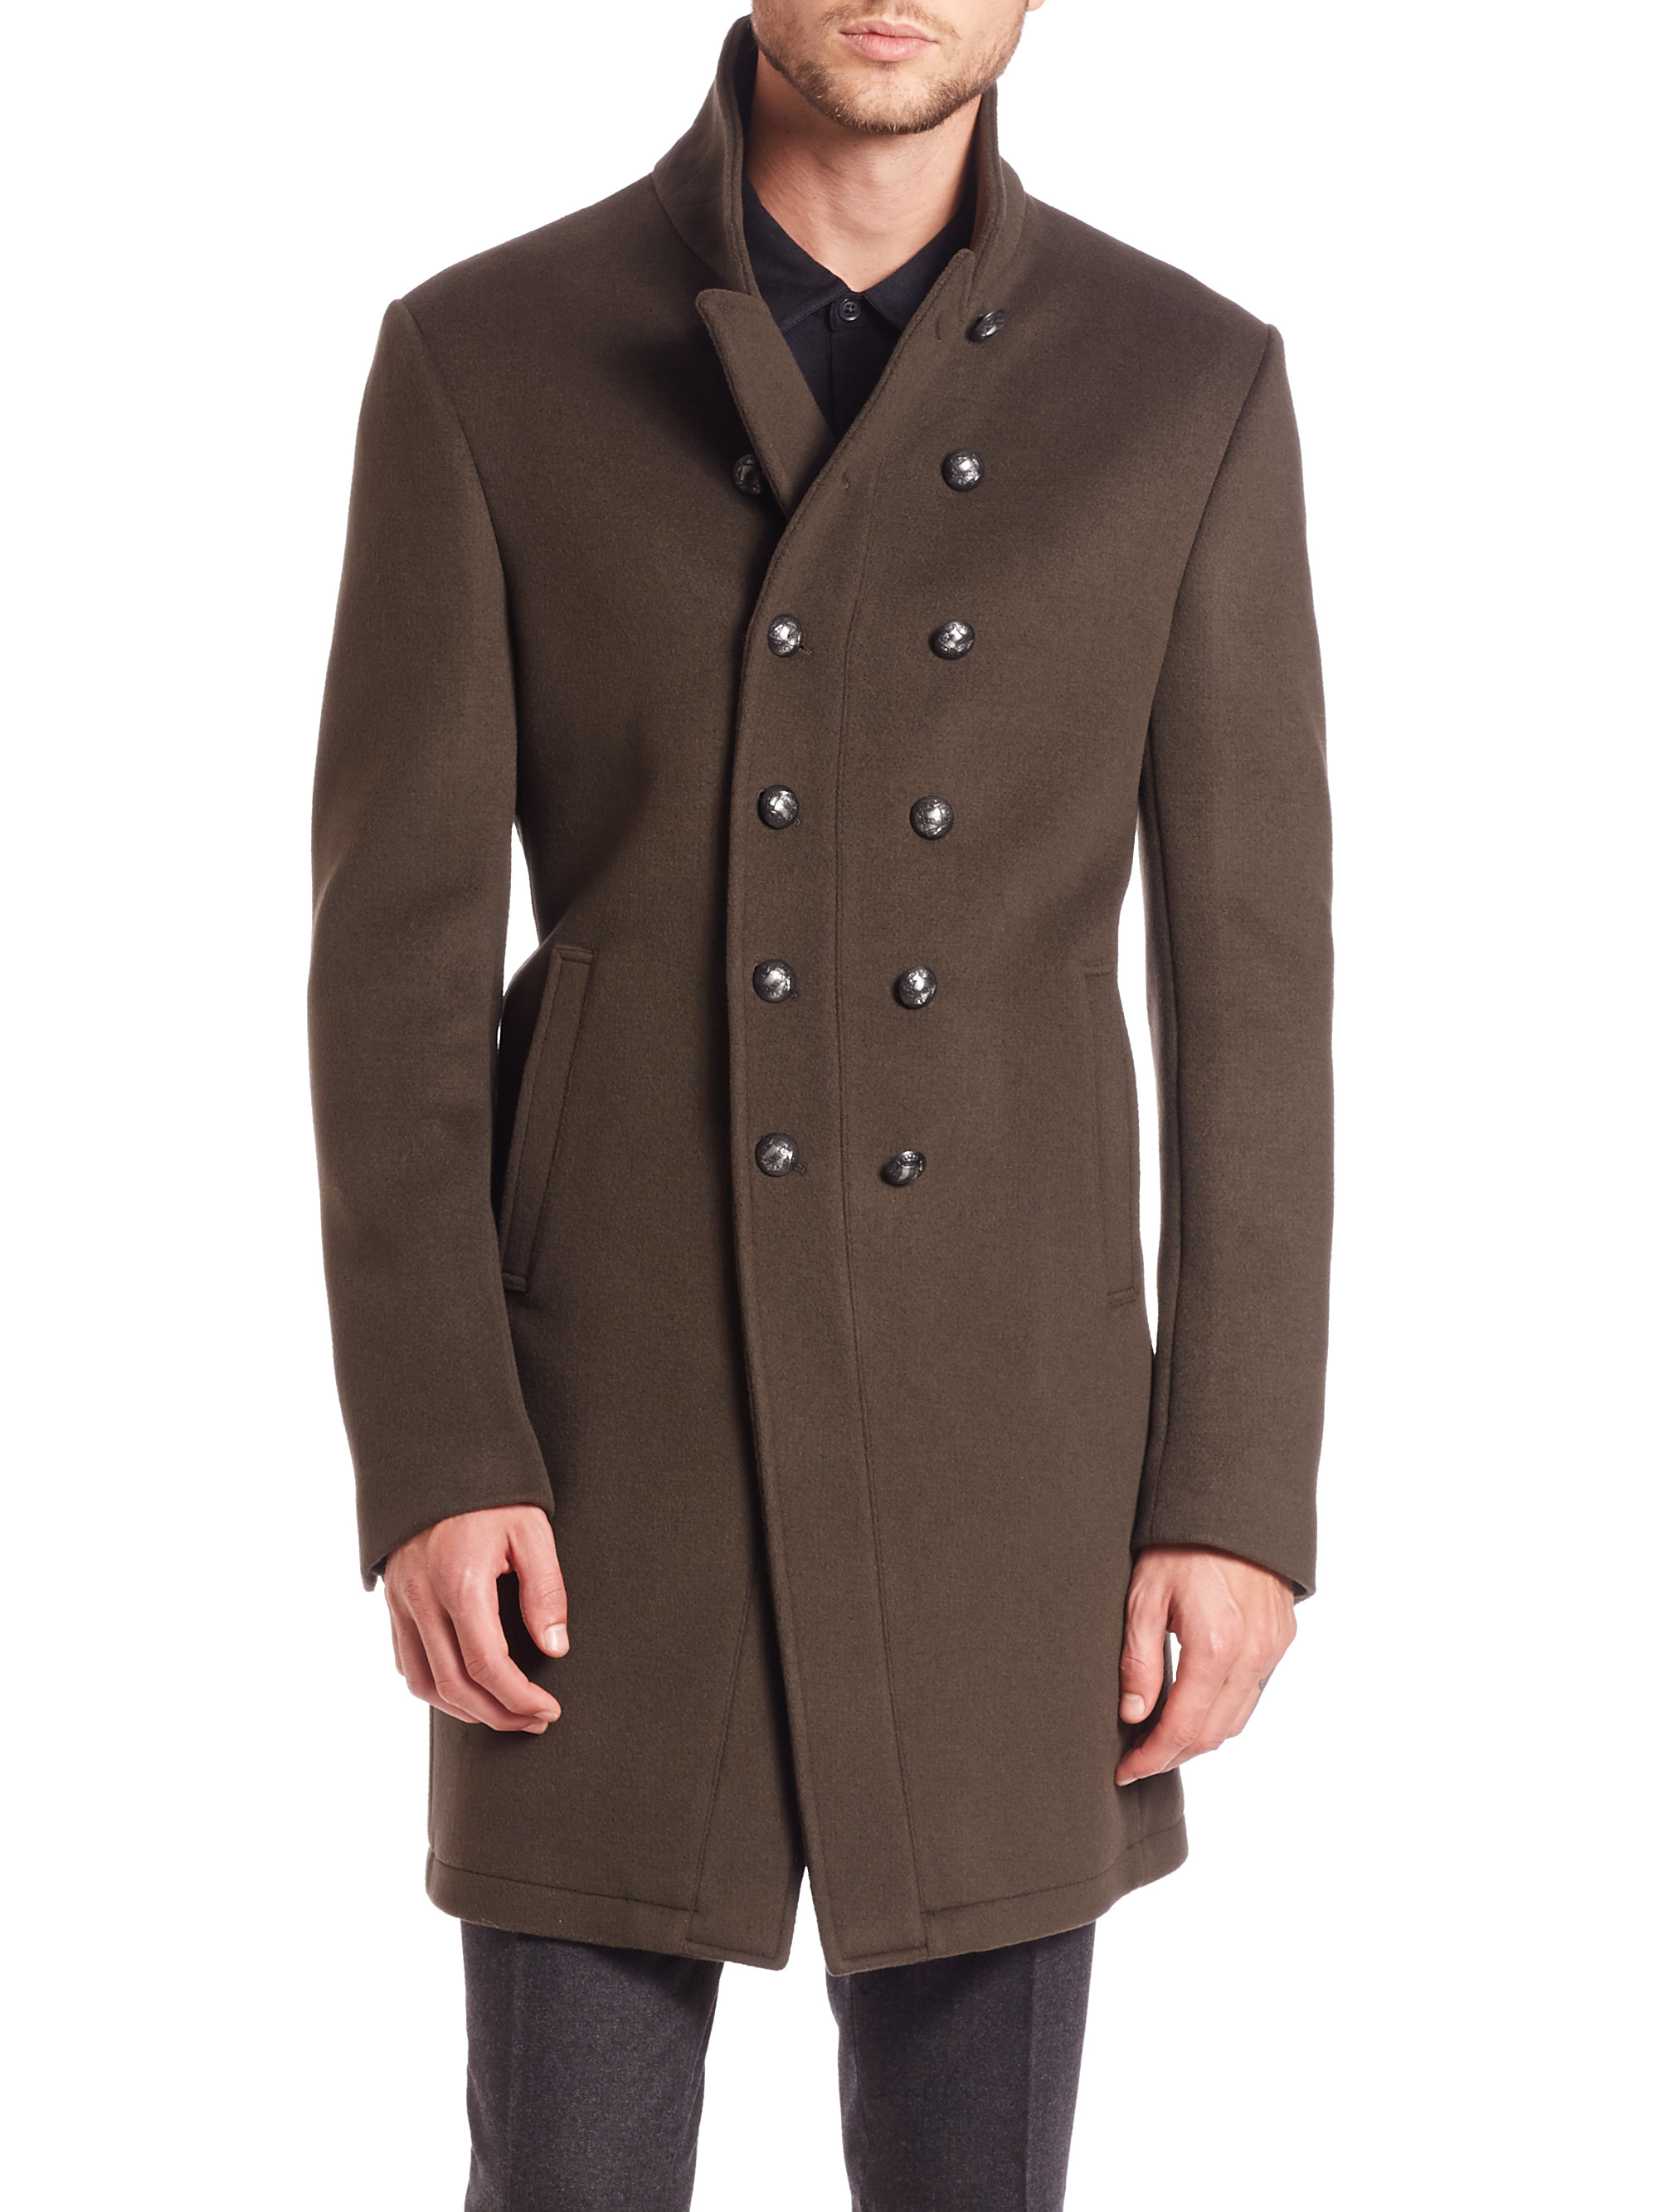 Lyst - John Varvatos Double Breasted Wool-blend Coat in Brown for Men